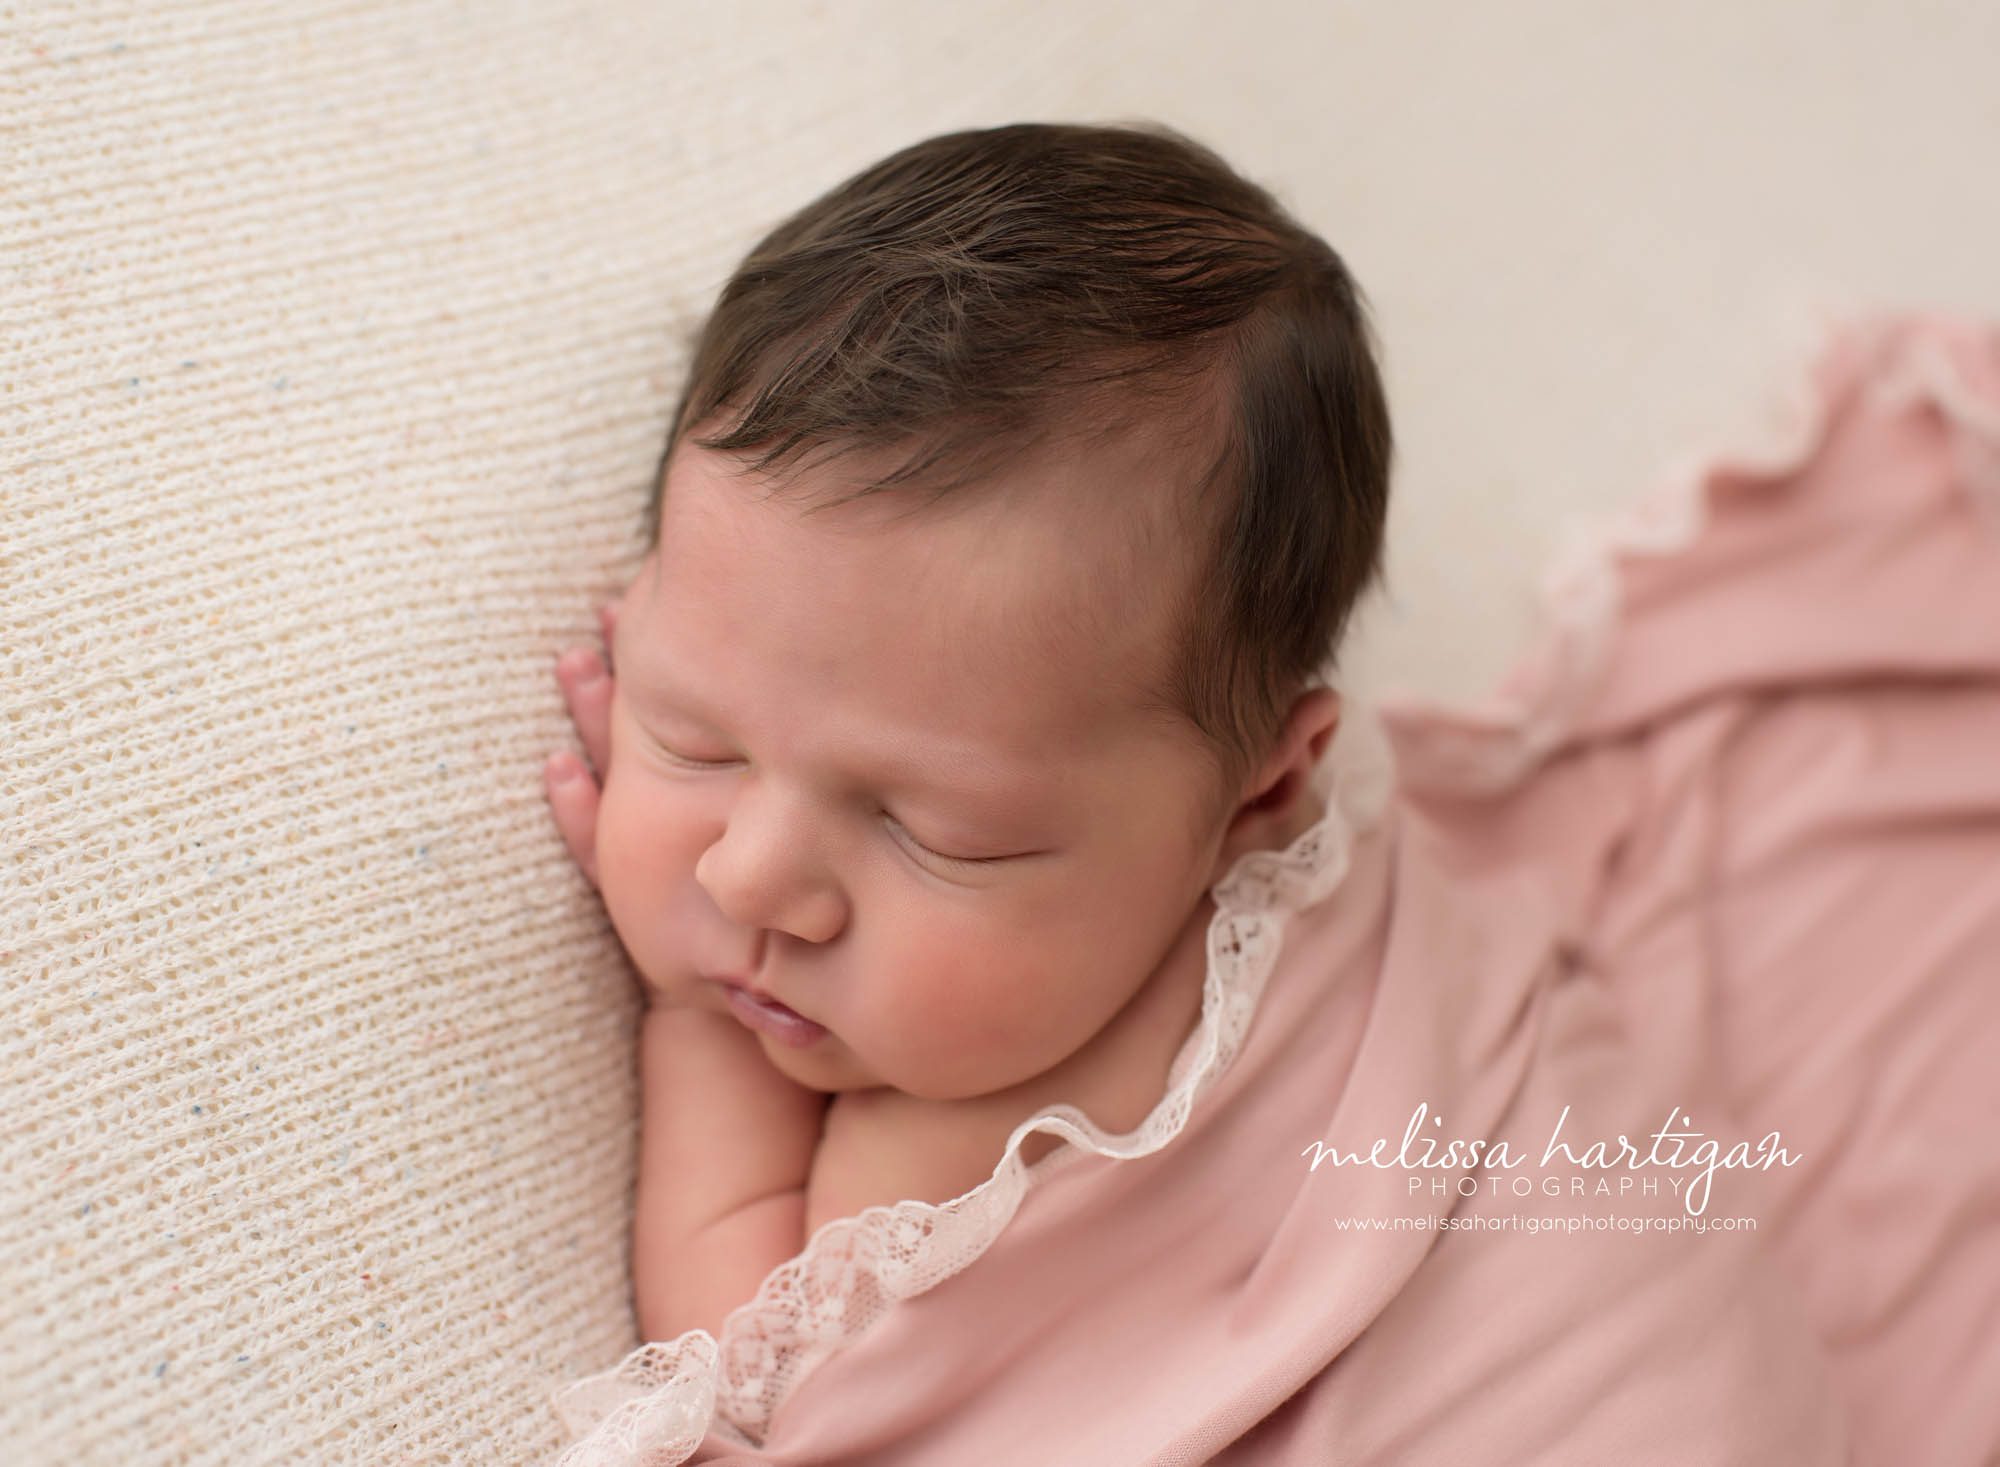 Melissa Hartigan Photography Connecticut Newborn Photographer trumbull Ct baby Fairfield county Baby girl pink wrap on pink blanket sleeping CT mini newborn session close up